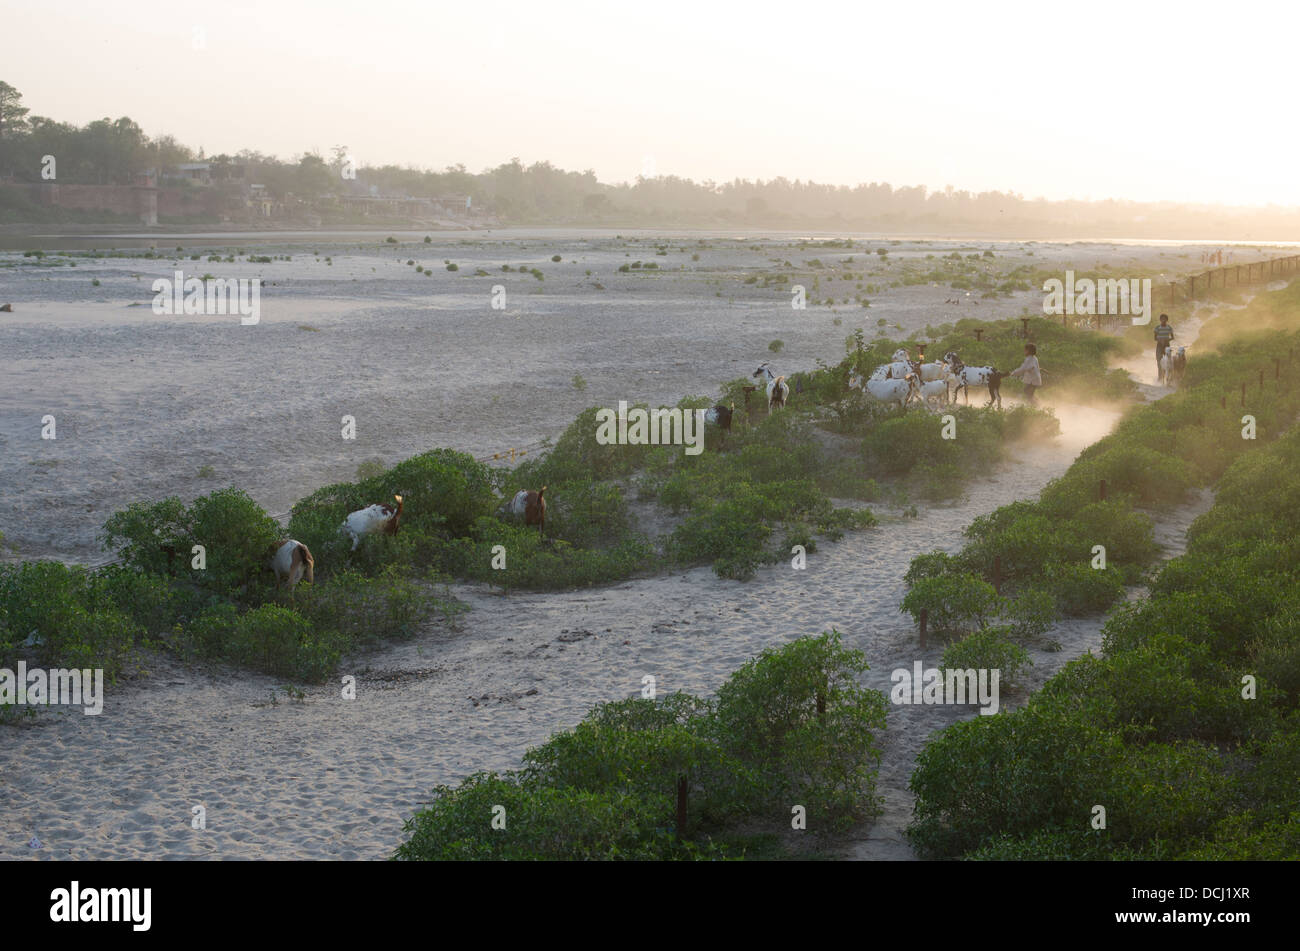 Young goat herders on the banks of the Yamuna River at dusk / twilight. Agra, India Stock Photo